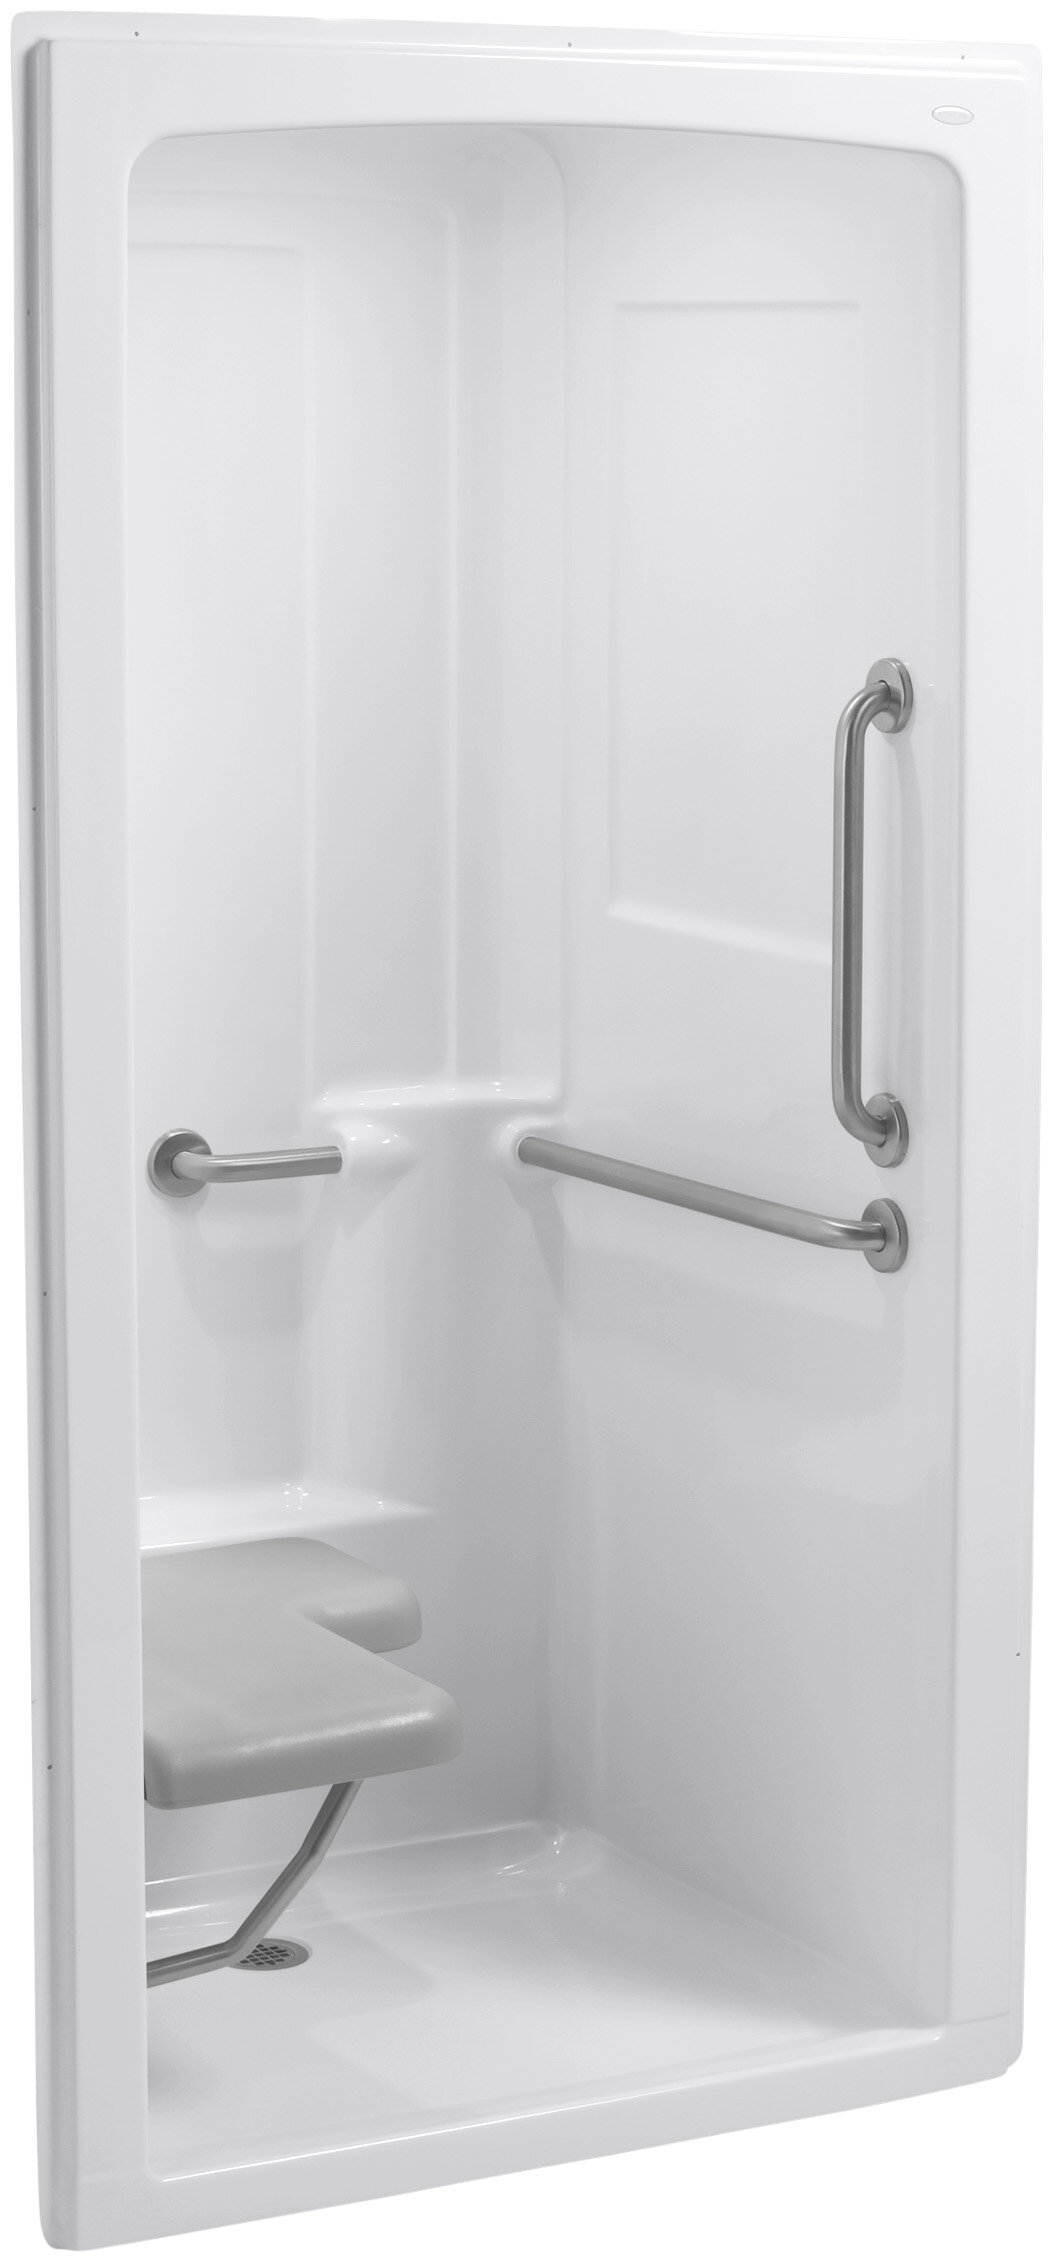 Kohler Freewill 45 X 37 1 4 X 84 One Piece Barrier Free Transfer Commercial Shower Stall With Brushed Stainless Steel Grab Bars And Left Hand Seat Wayfair